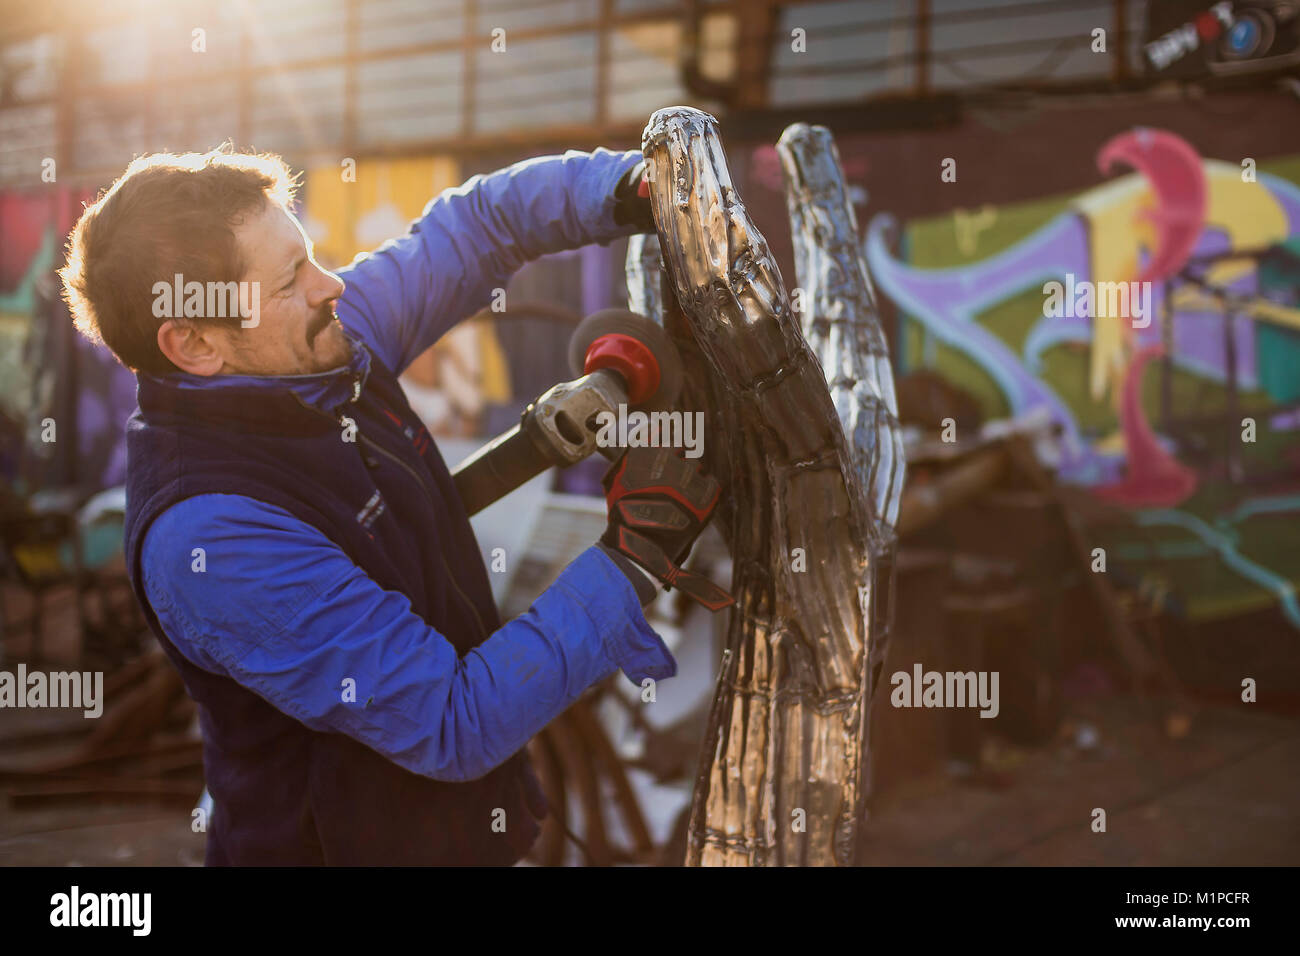 Artist grinding and Polishing his silver Tree Sculpture in the sunset outside in the front of his Work Shop but forgetting to wear his safety gear Stock Photo